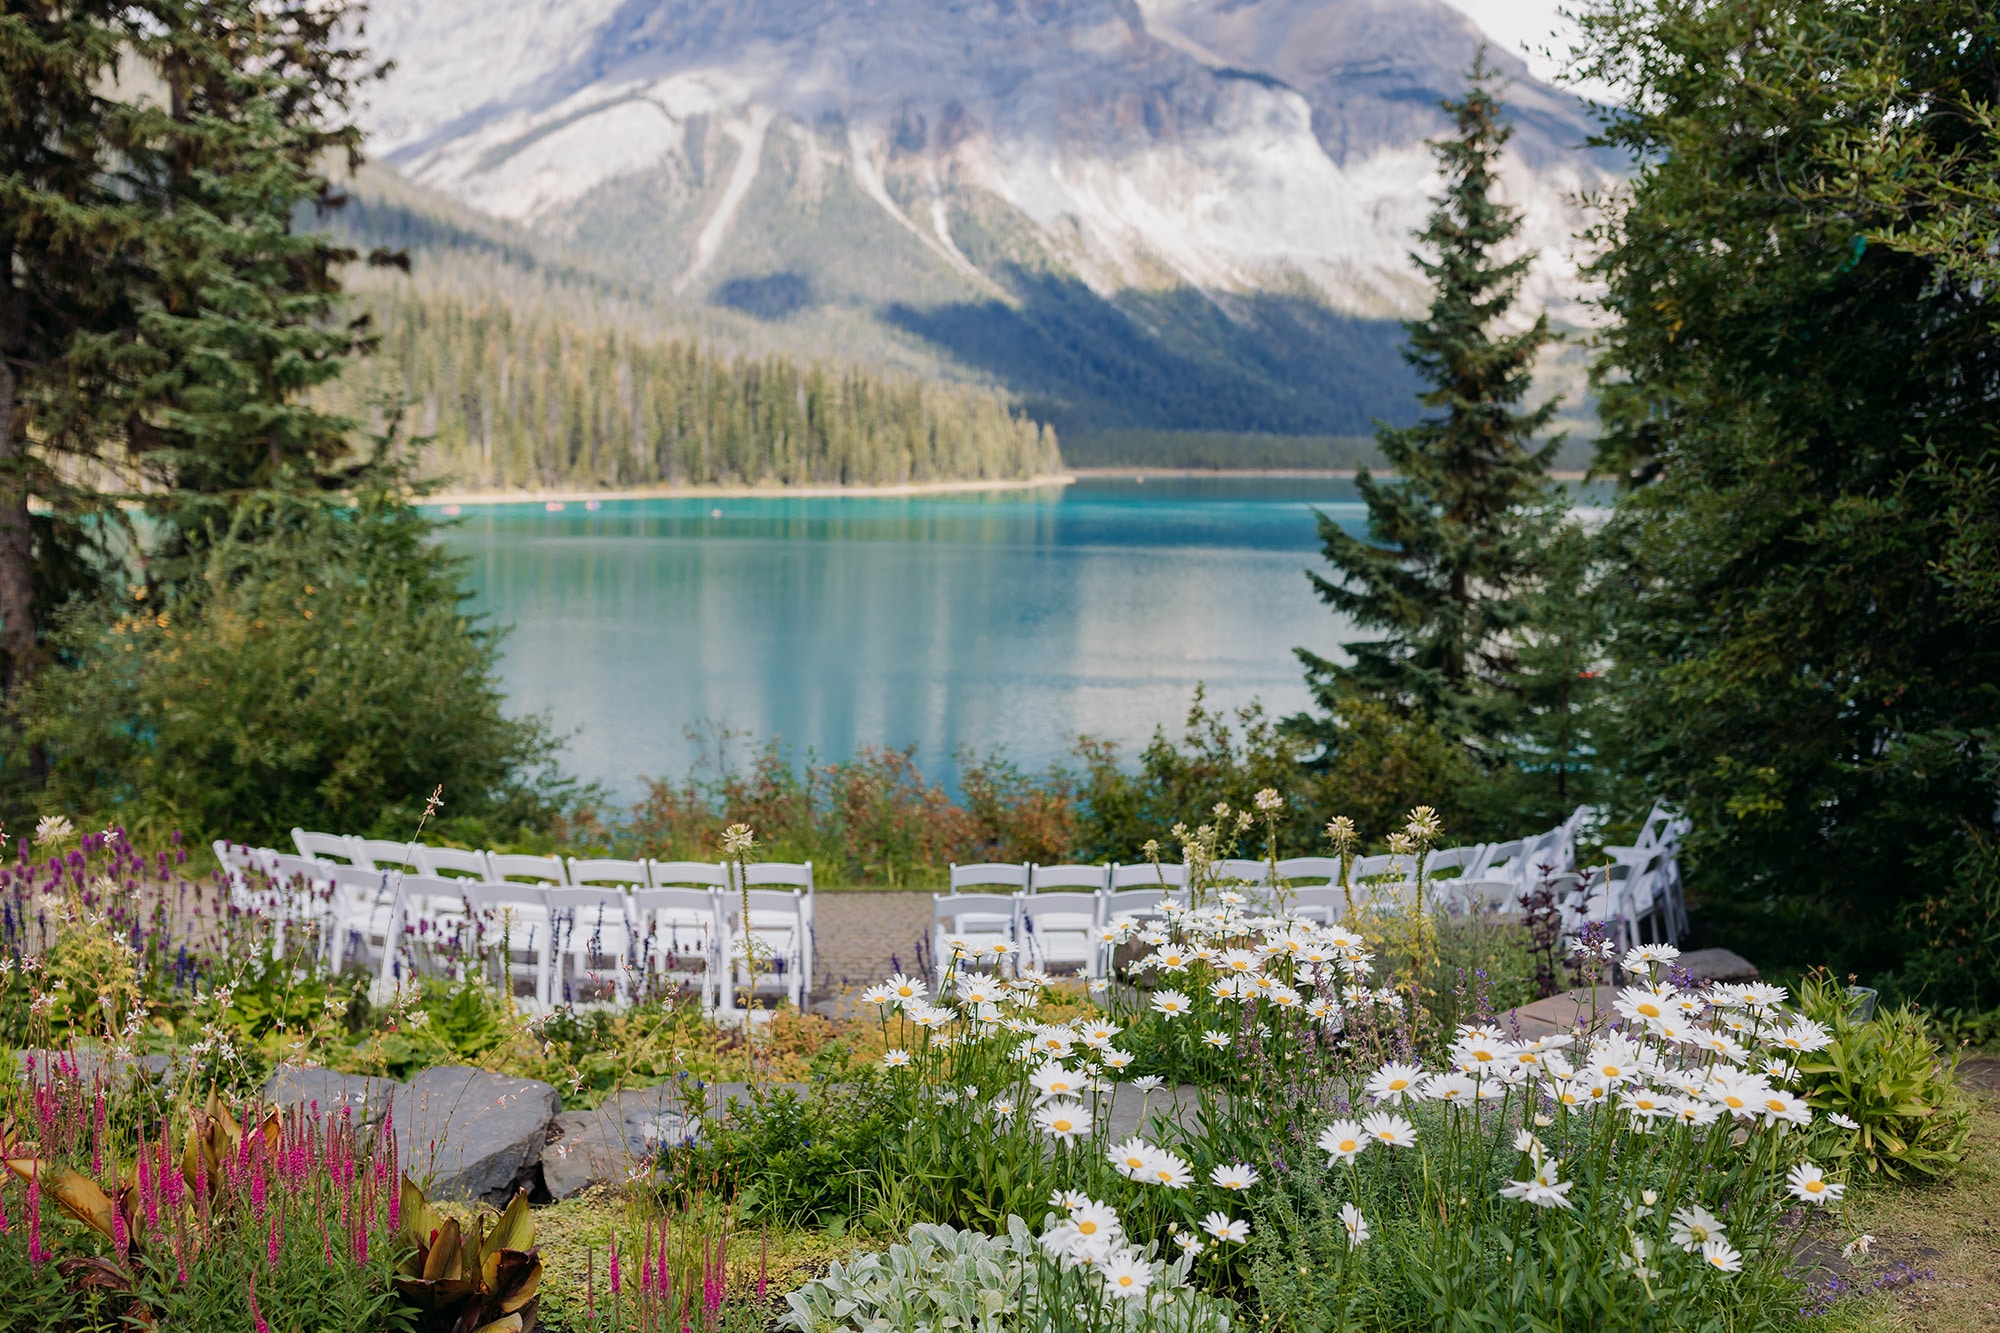 emerald lake autumn wedding outdoor ceremony at viewpoint with mountain views and blue green waters